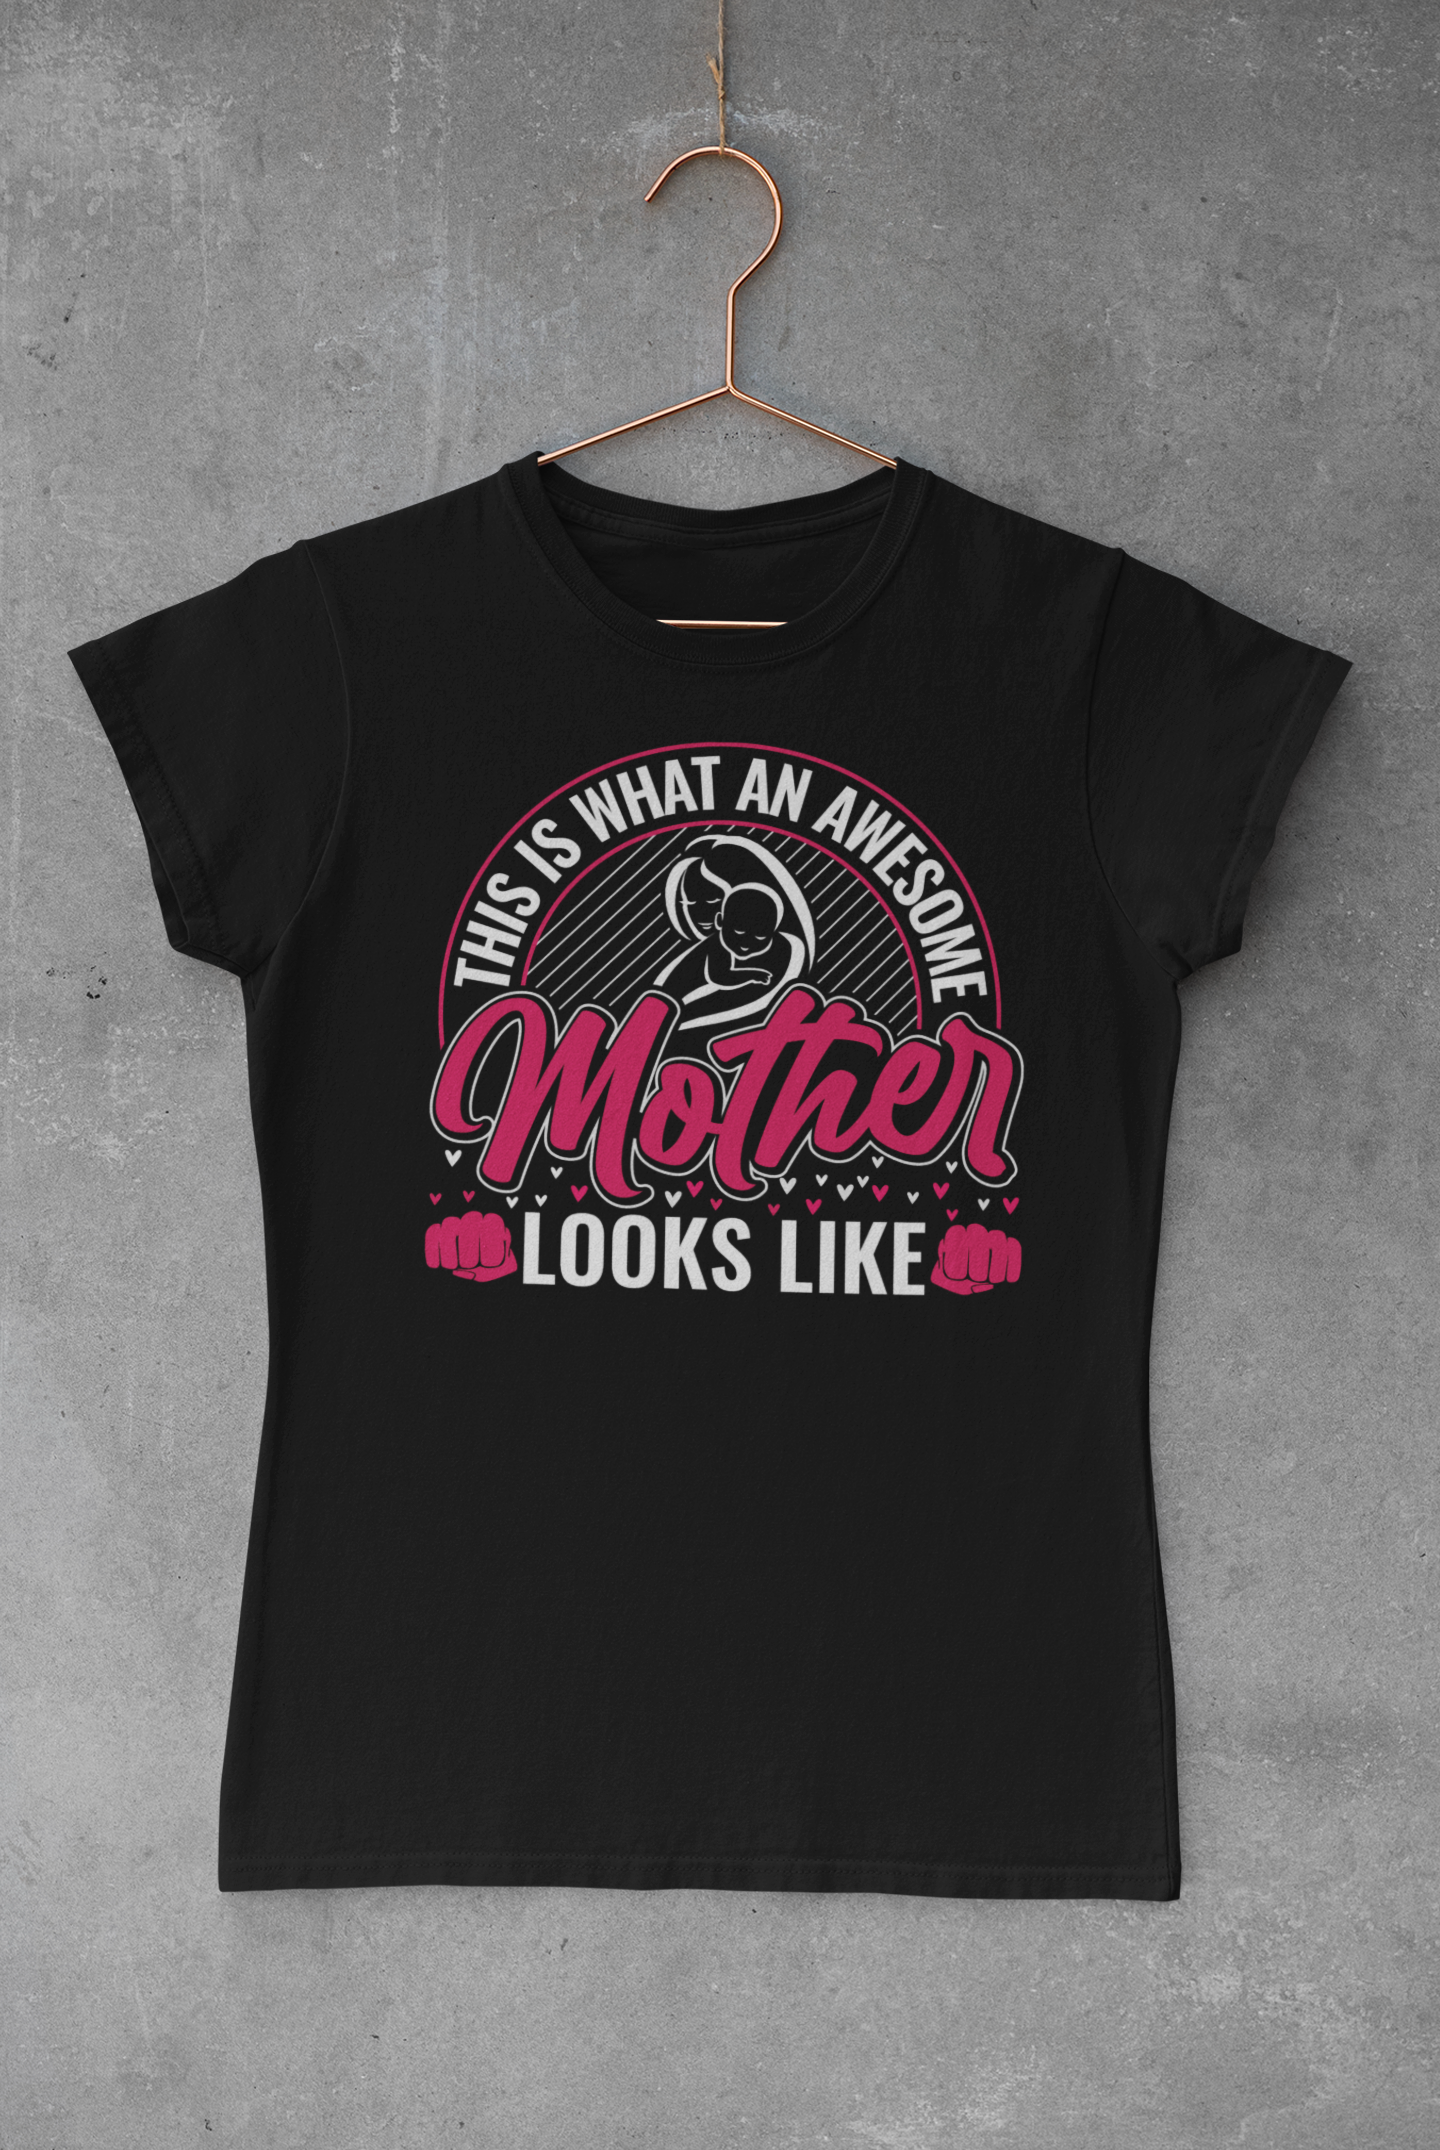 This Is What An Awesome Mother Looks Like T-shirt